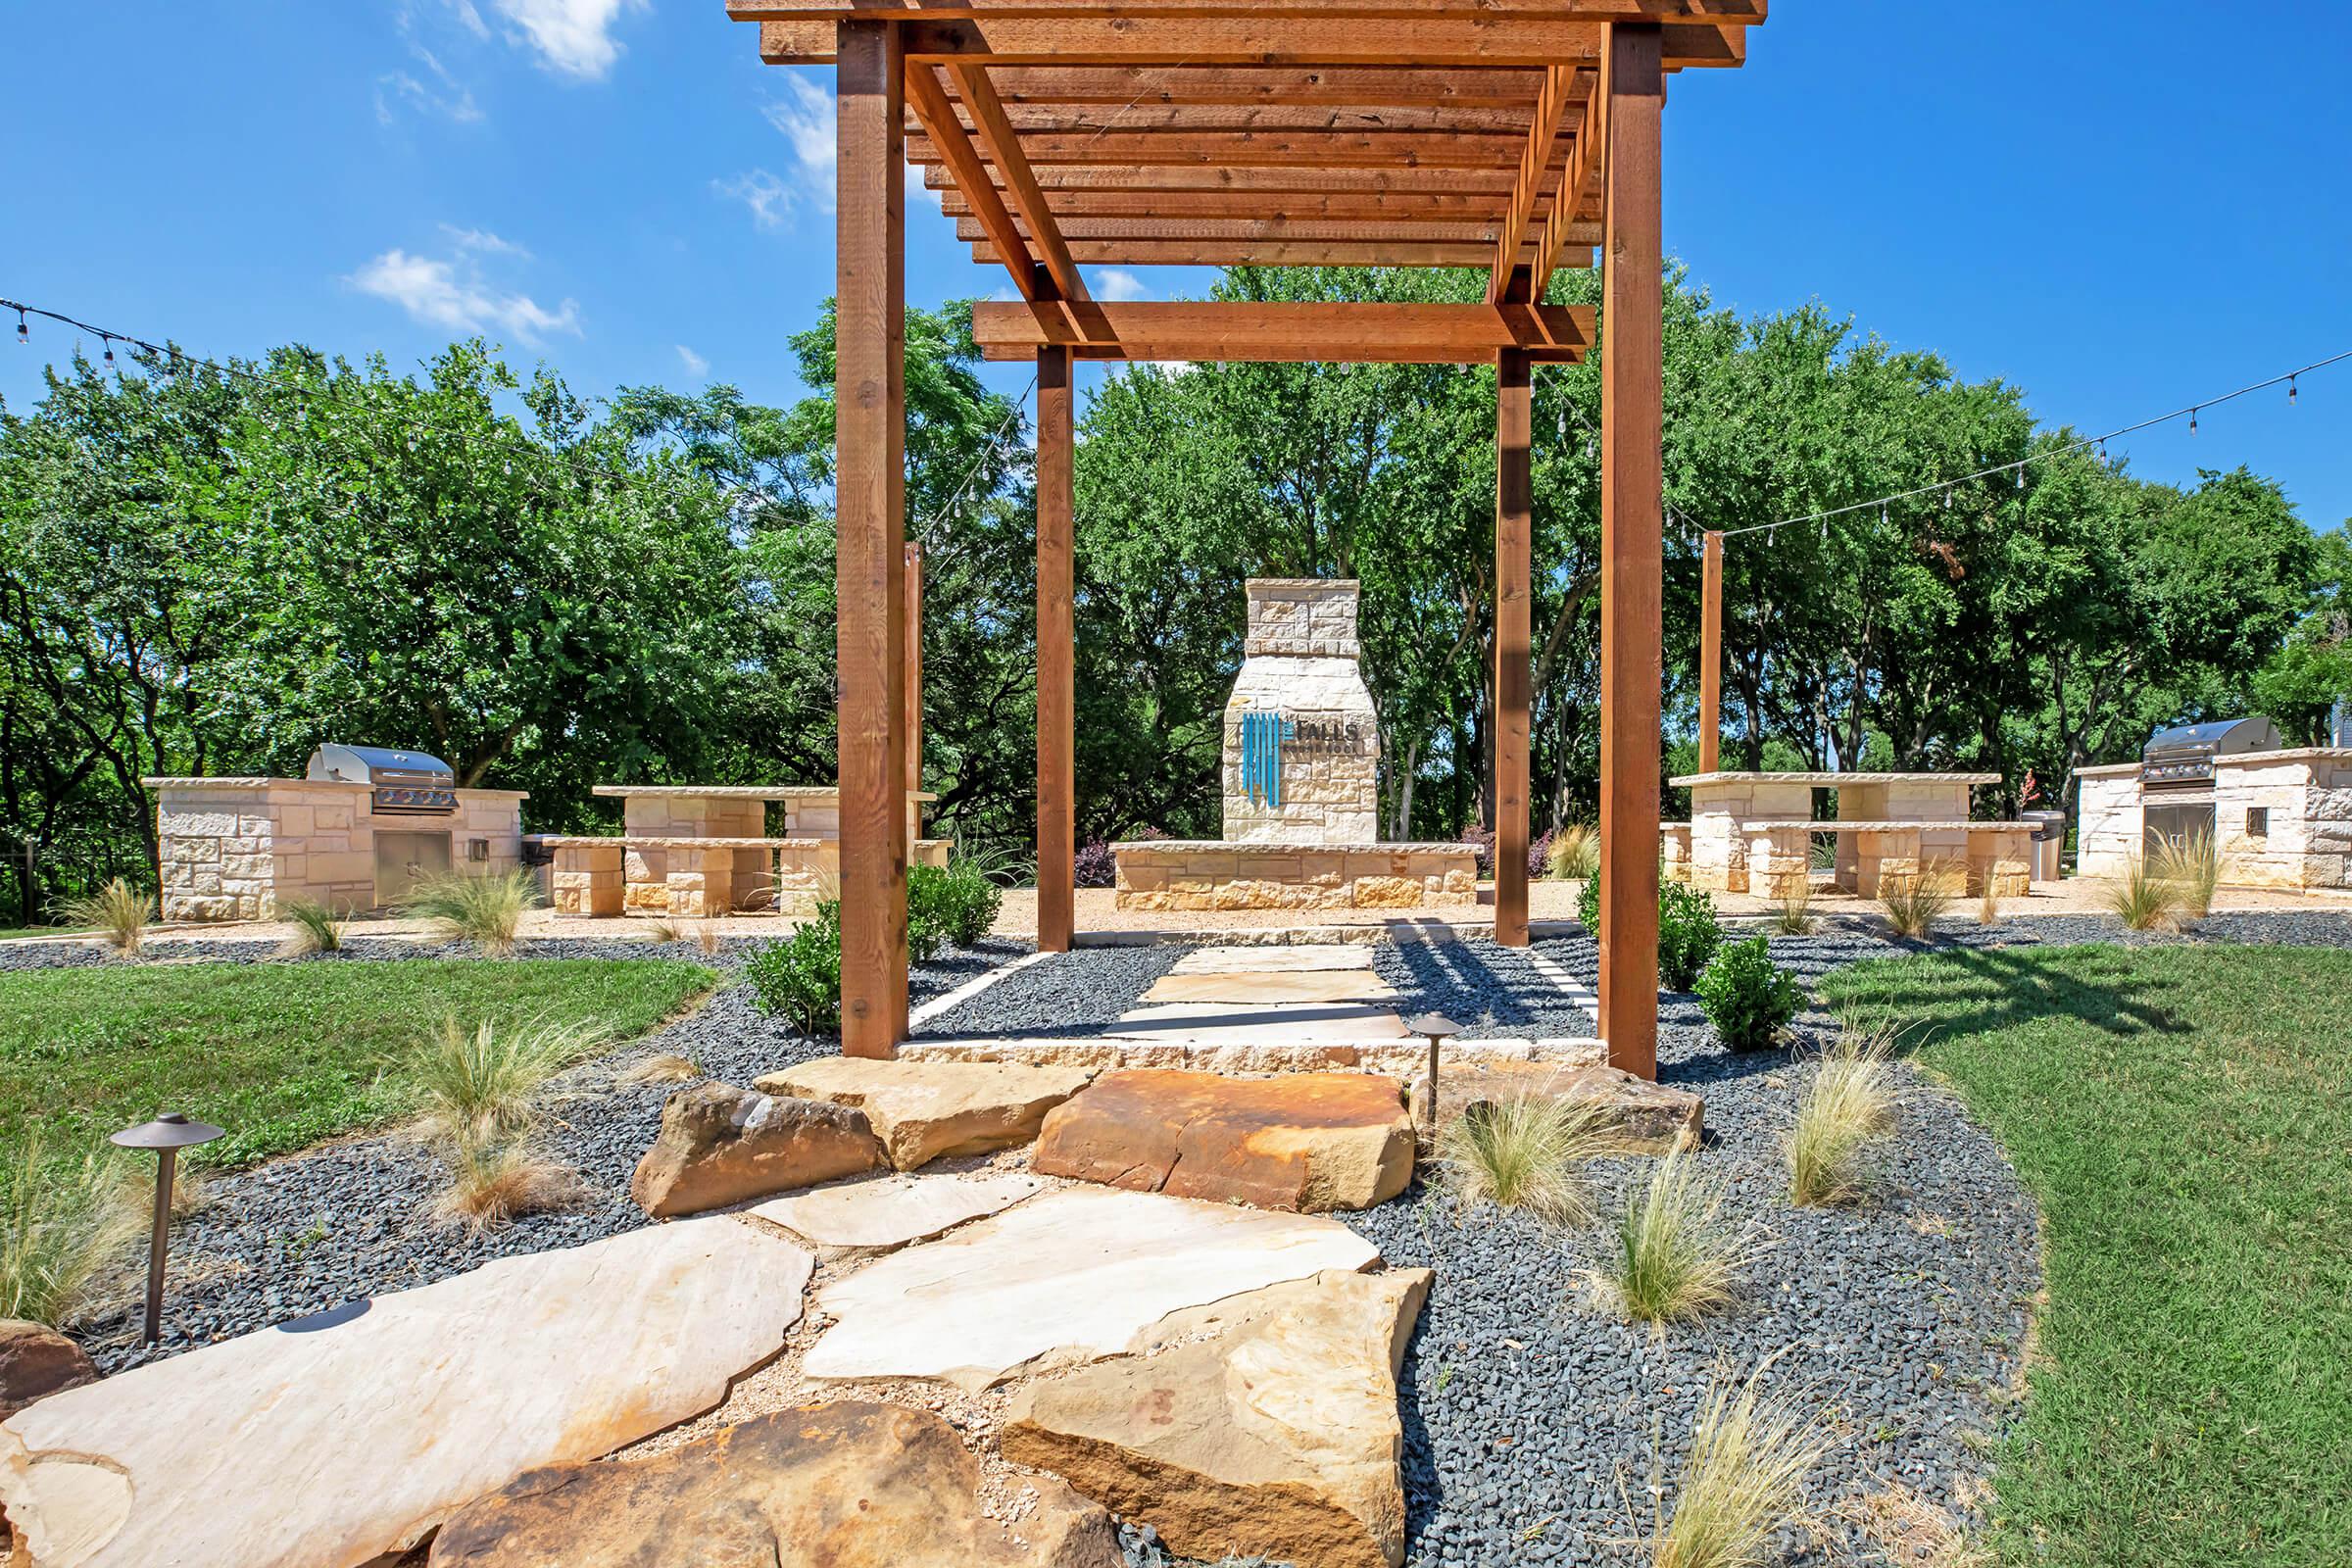 walkway to community courtyard with a pergola